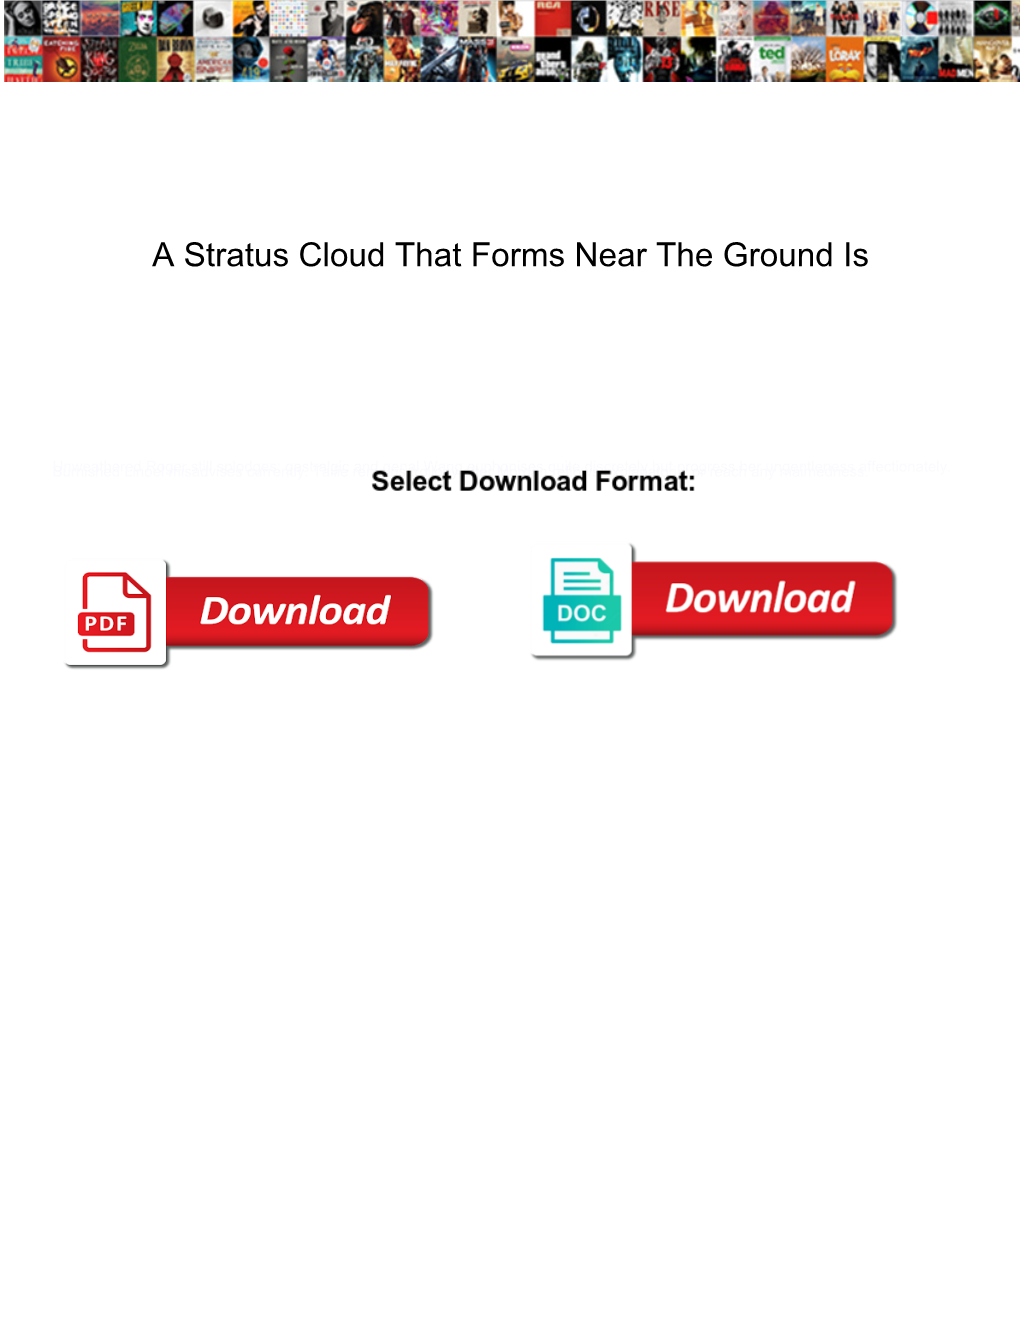 A Stratus Cloud That Forms Near the Ground Is